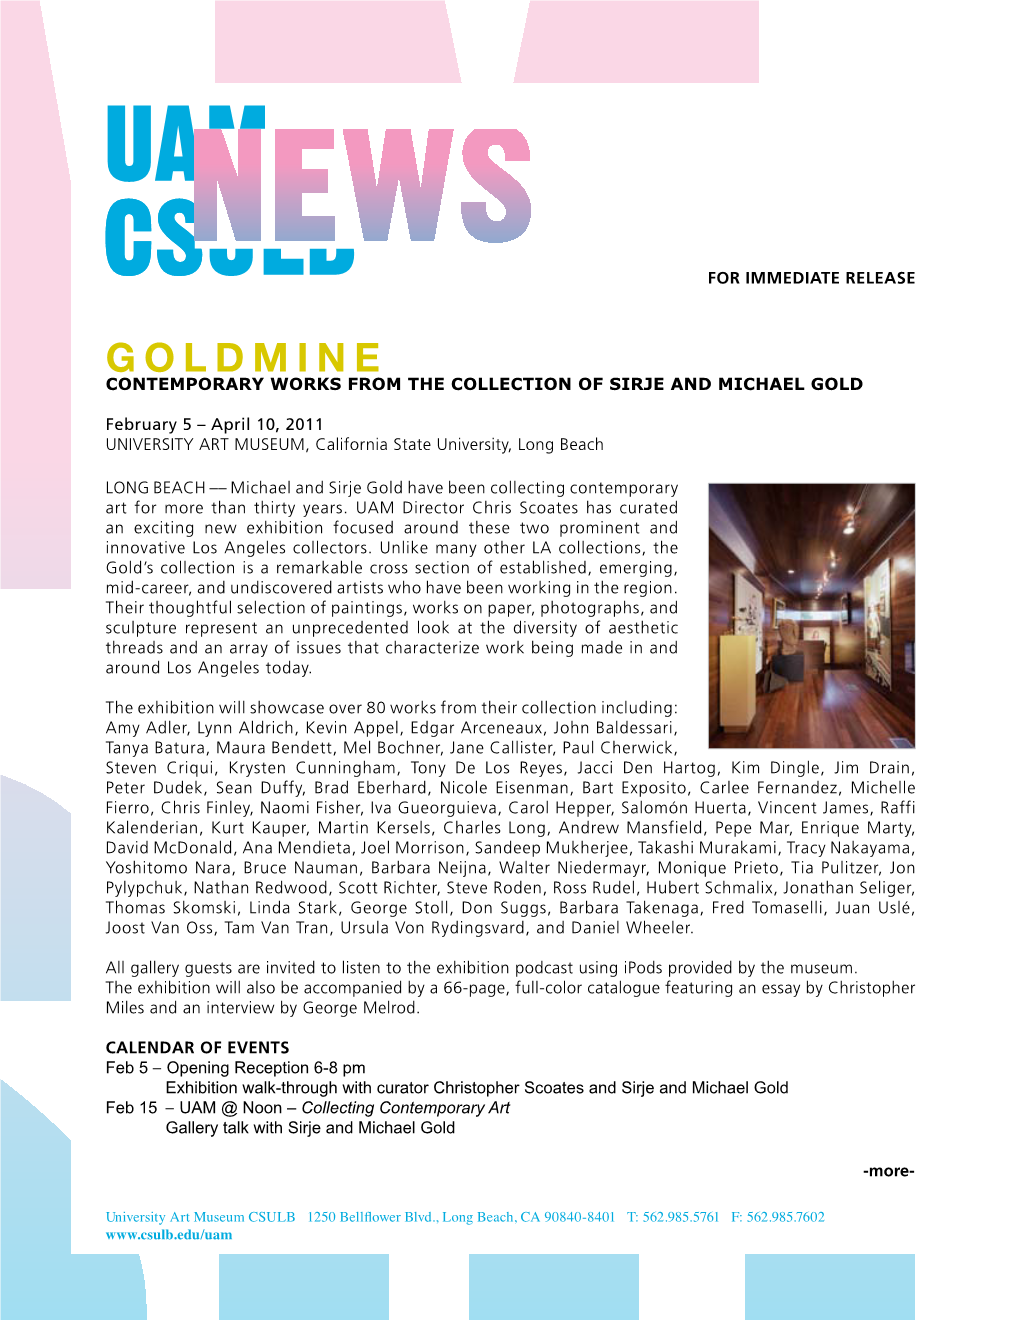 GOLDMINE Contemporary Works from the Collection of Sirje and Michael Gold